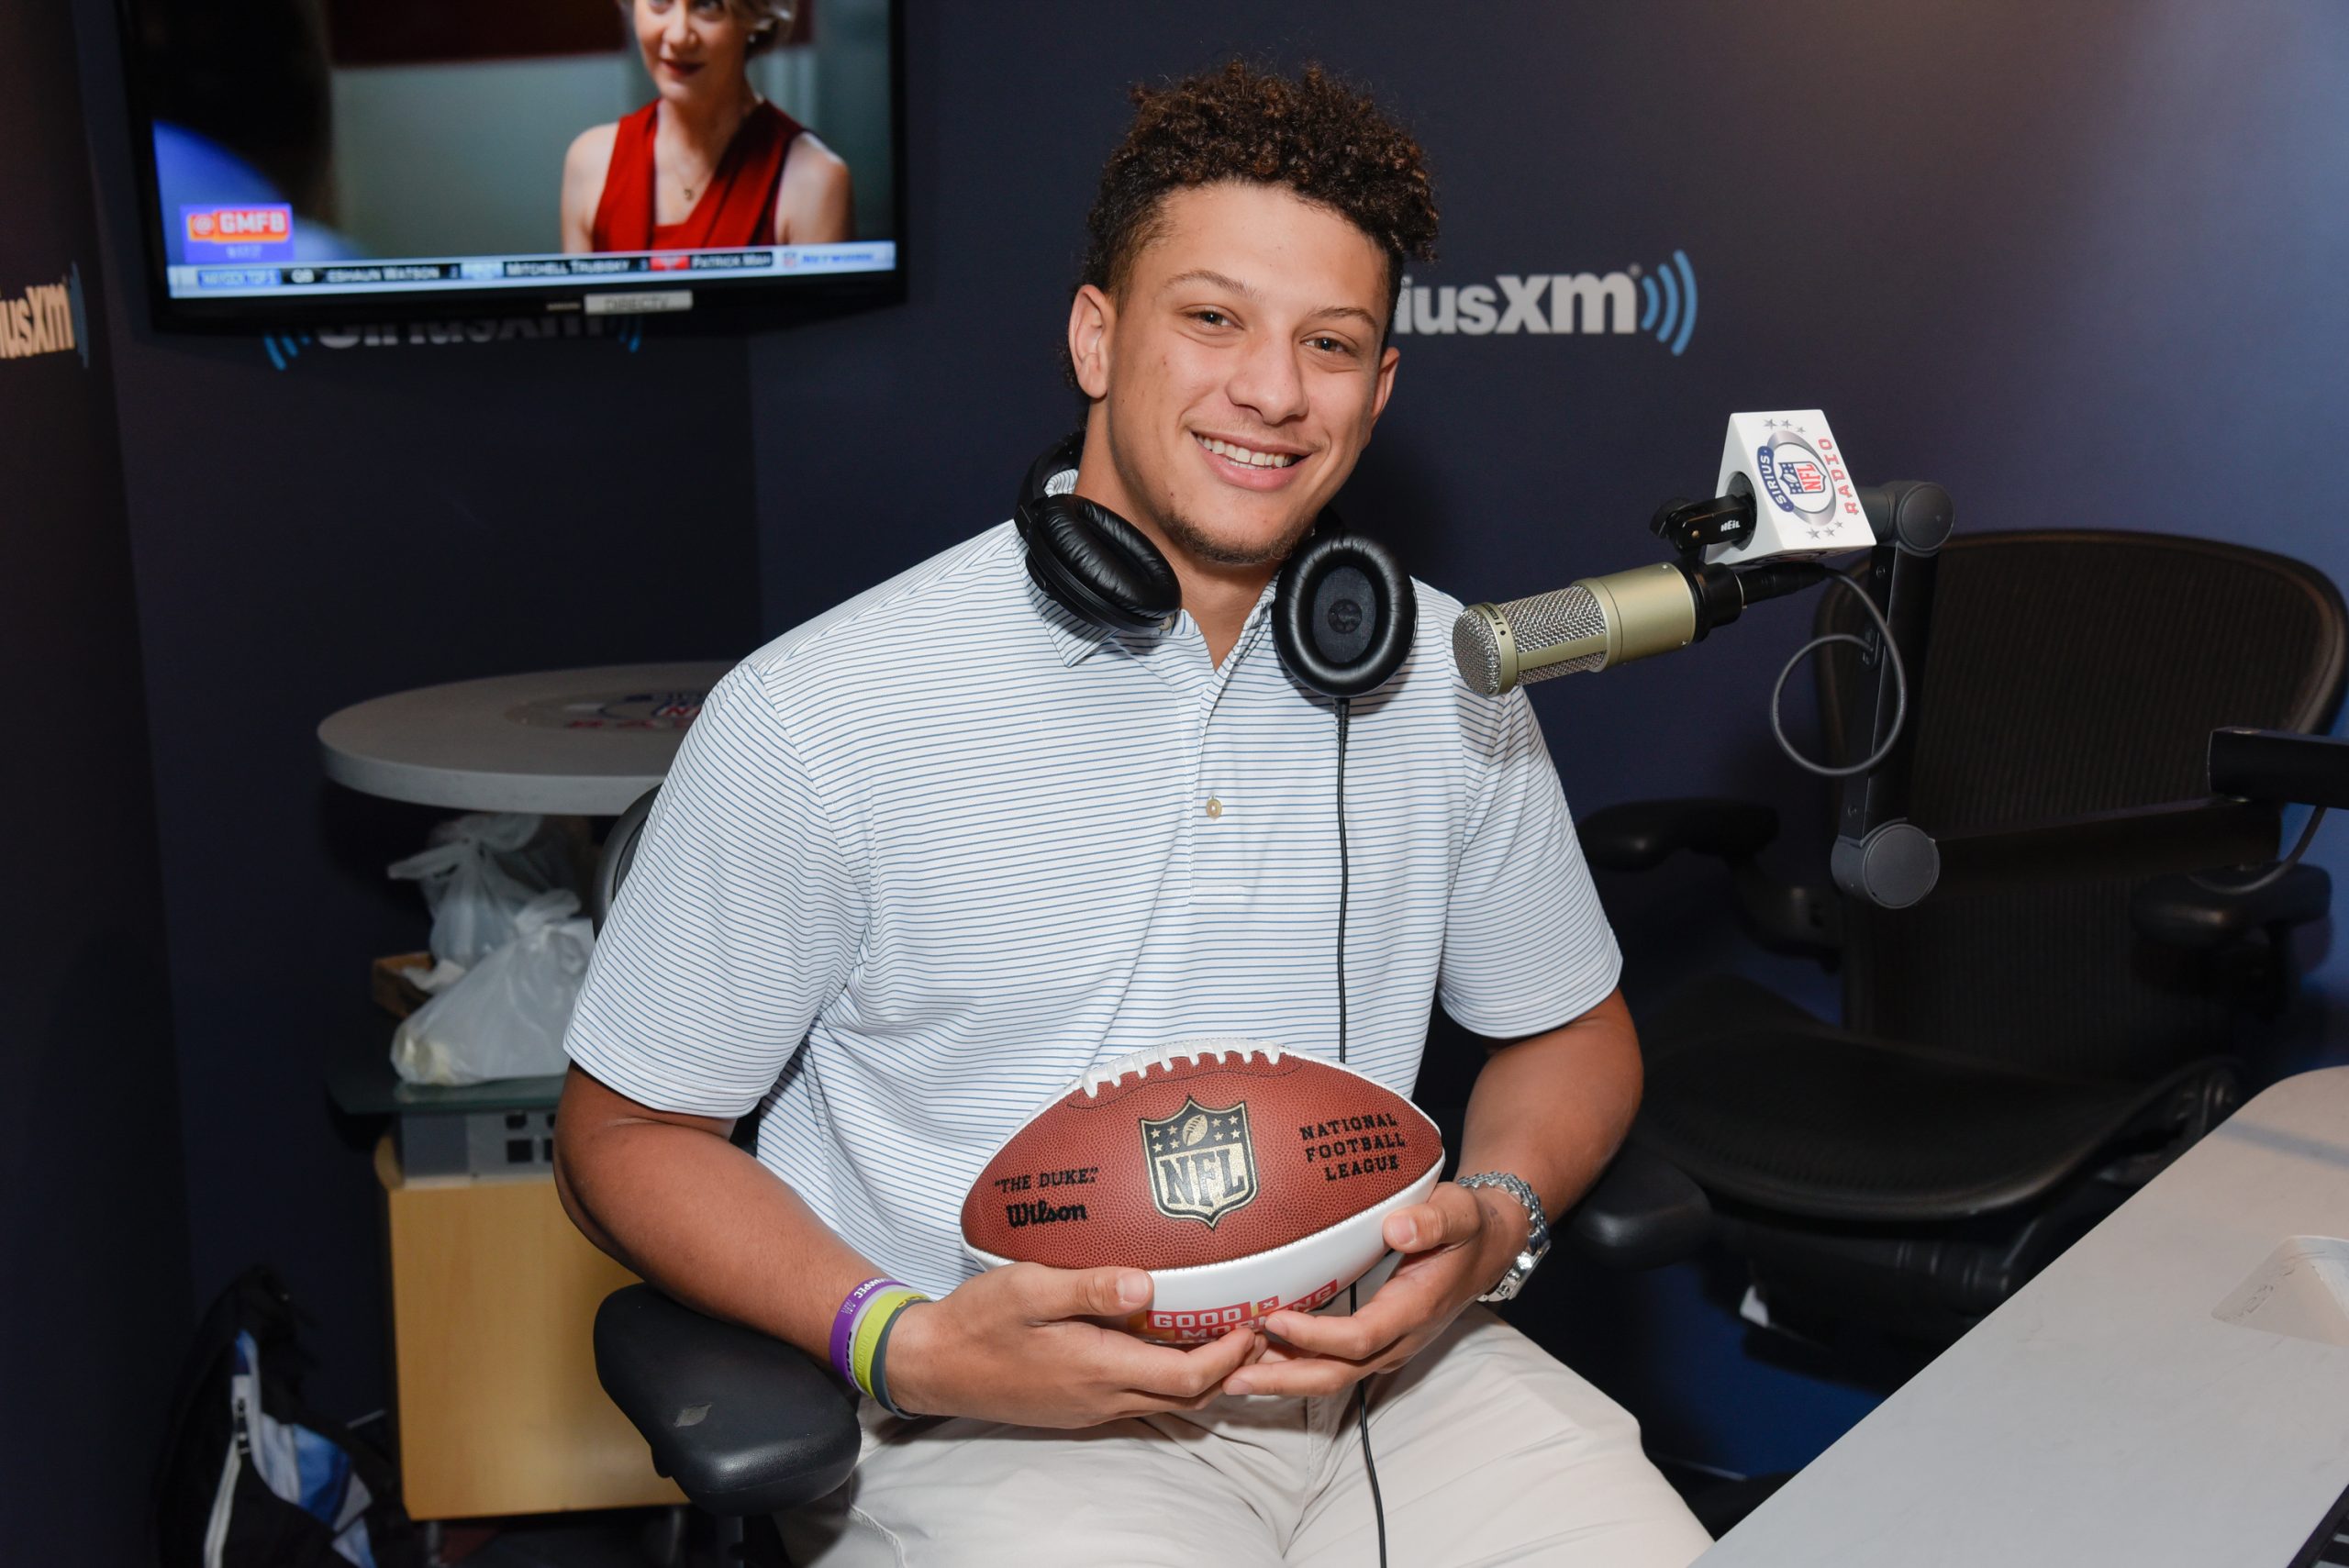 The three-time Super Bowl champion Patrick Mahomes was drafted by the Kansas City Chiefs with the No. 10 overall pick in the 2017 NFL Draft